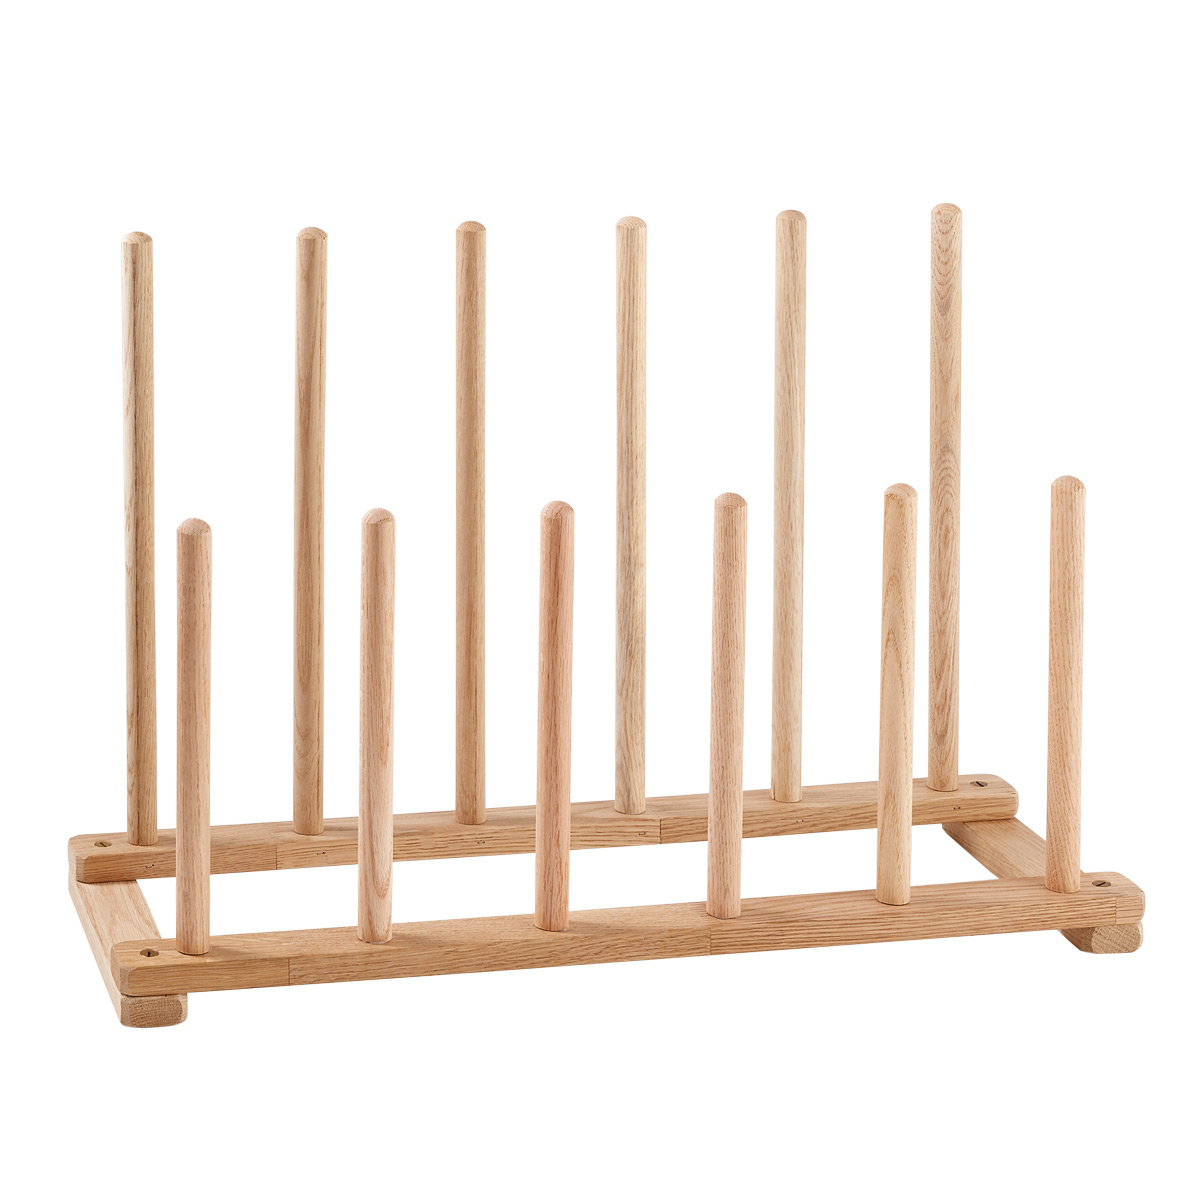 https://www.containerstore.com/catalogimages/388355/10080436-6-pair-boot-rack-natural.jpg